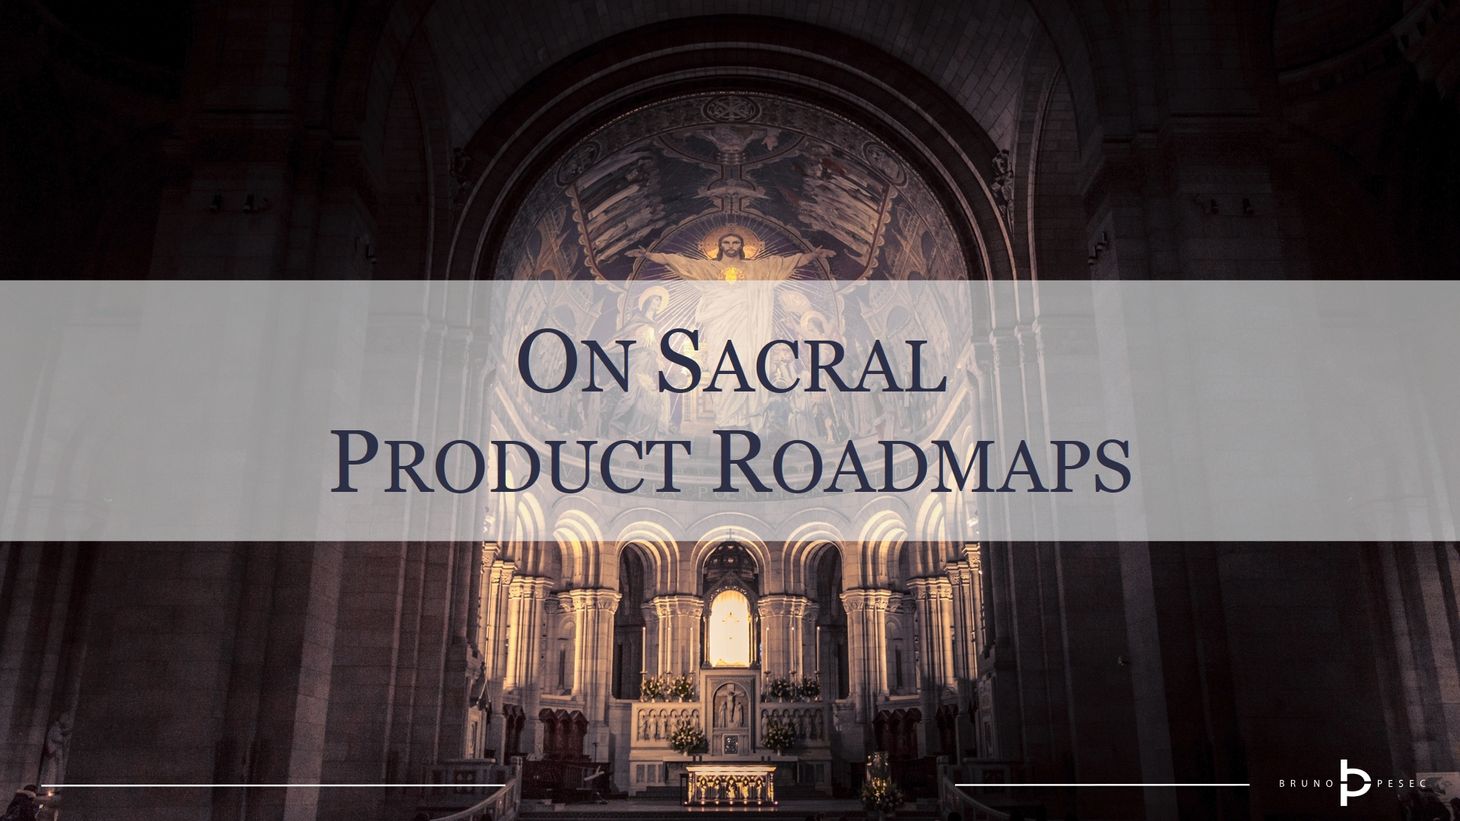 On sacral product roadmaps